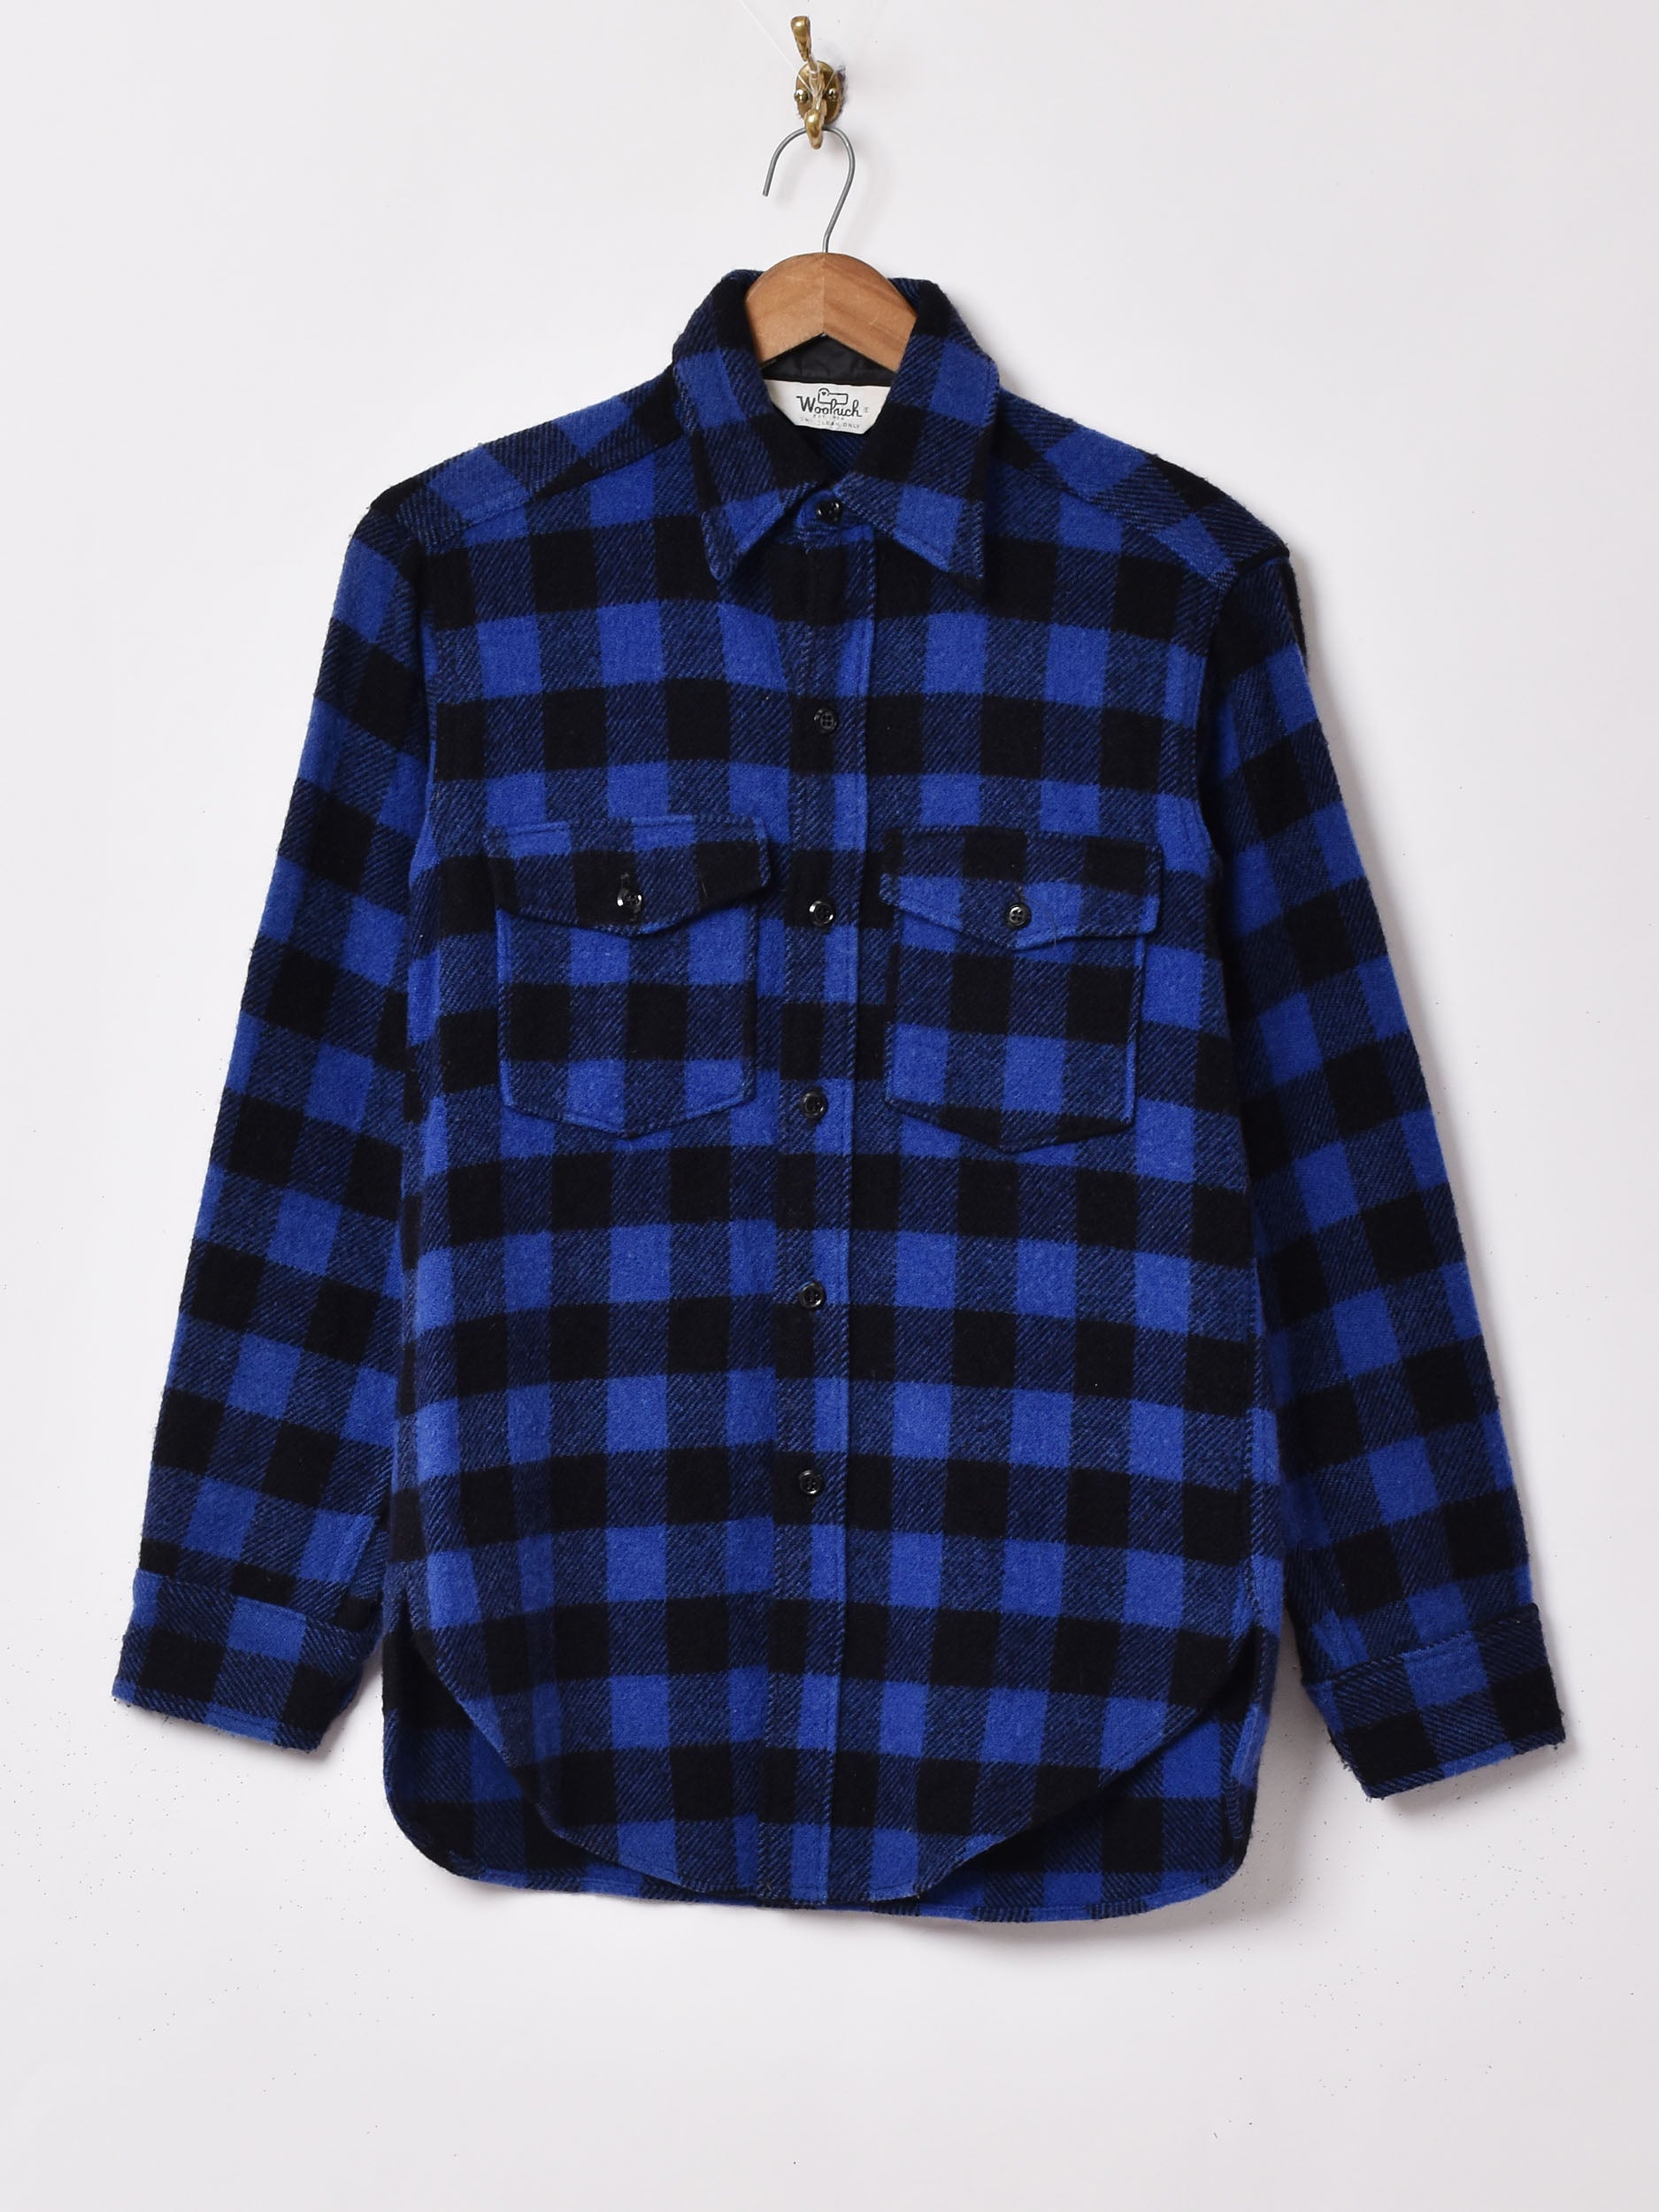 WOOLRICH バッファローチェック柄ウールシャツ – 古着屋Top of the